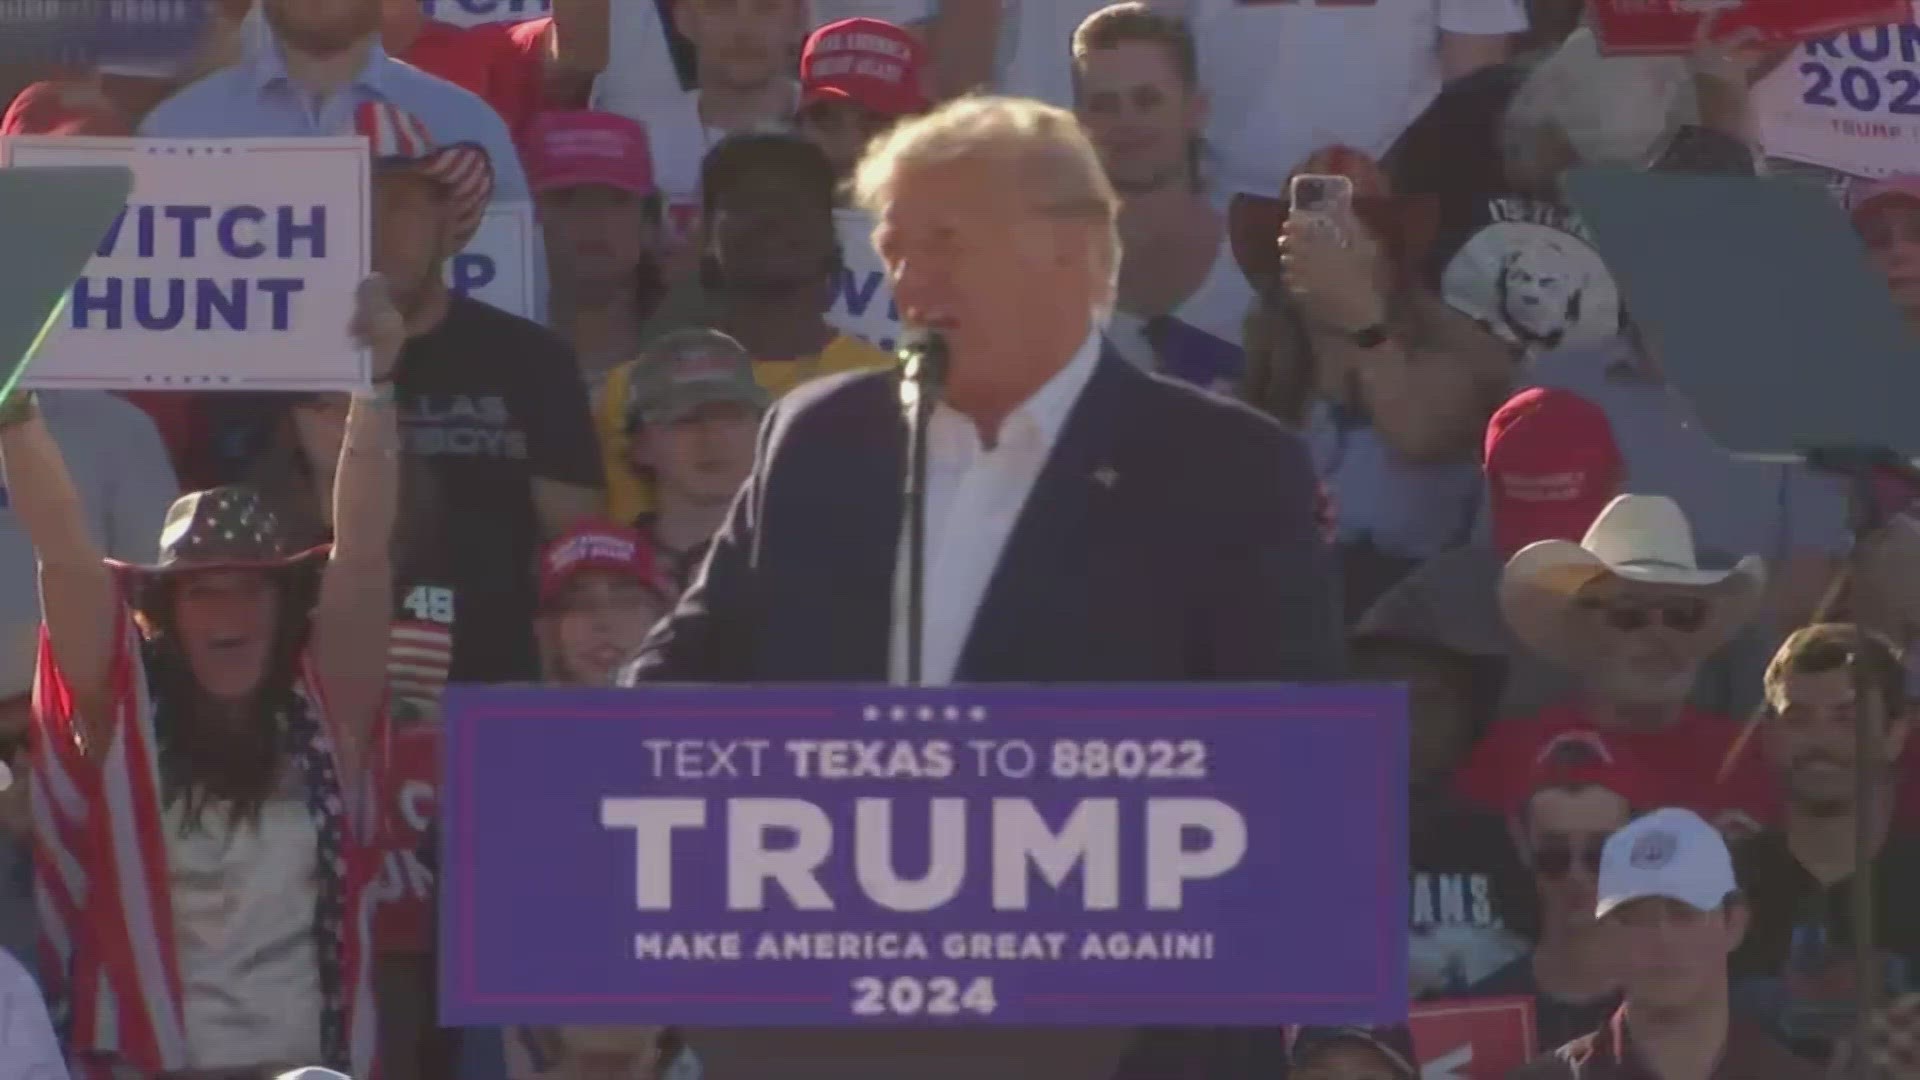 The Trump campaign said they chose Waco because it is near all four of Texas' largest cities.